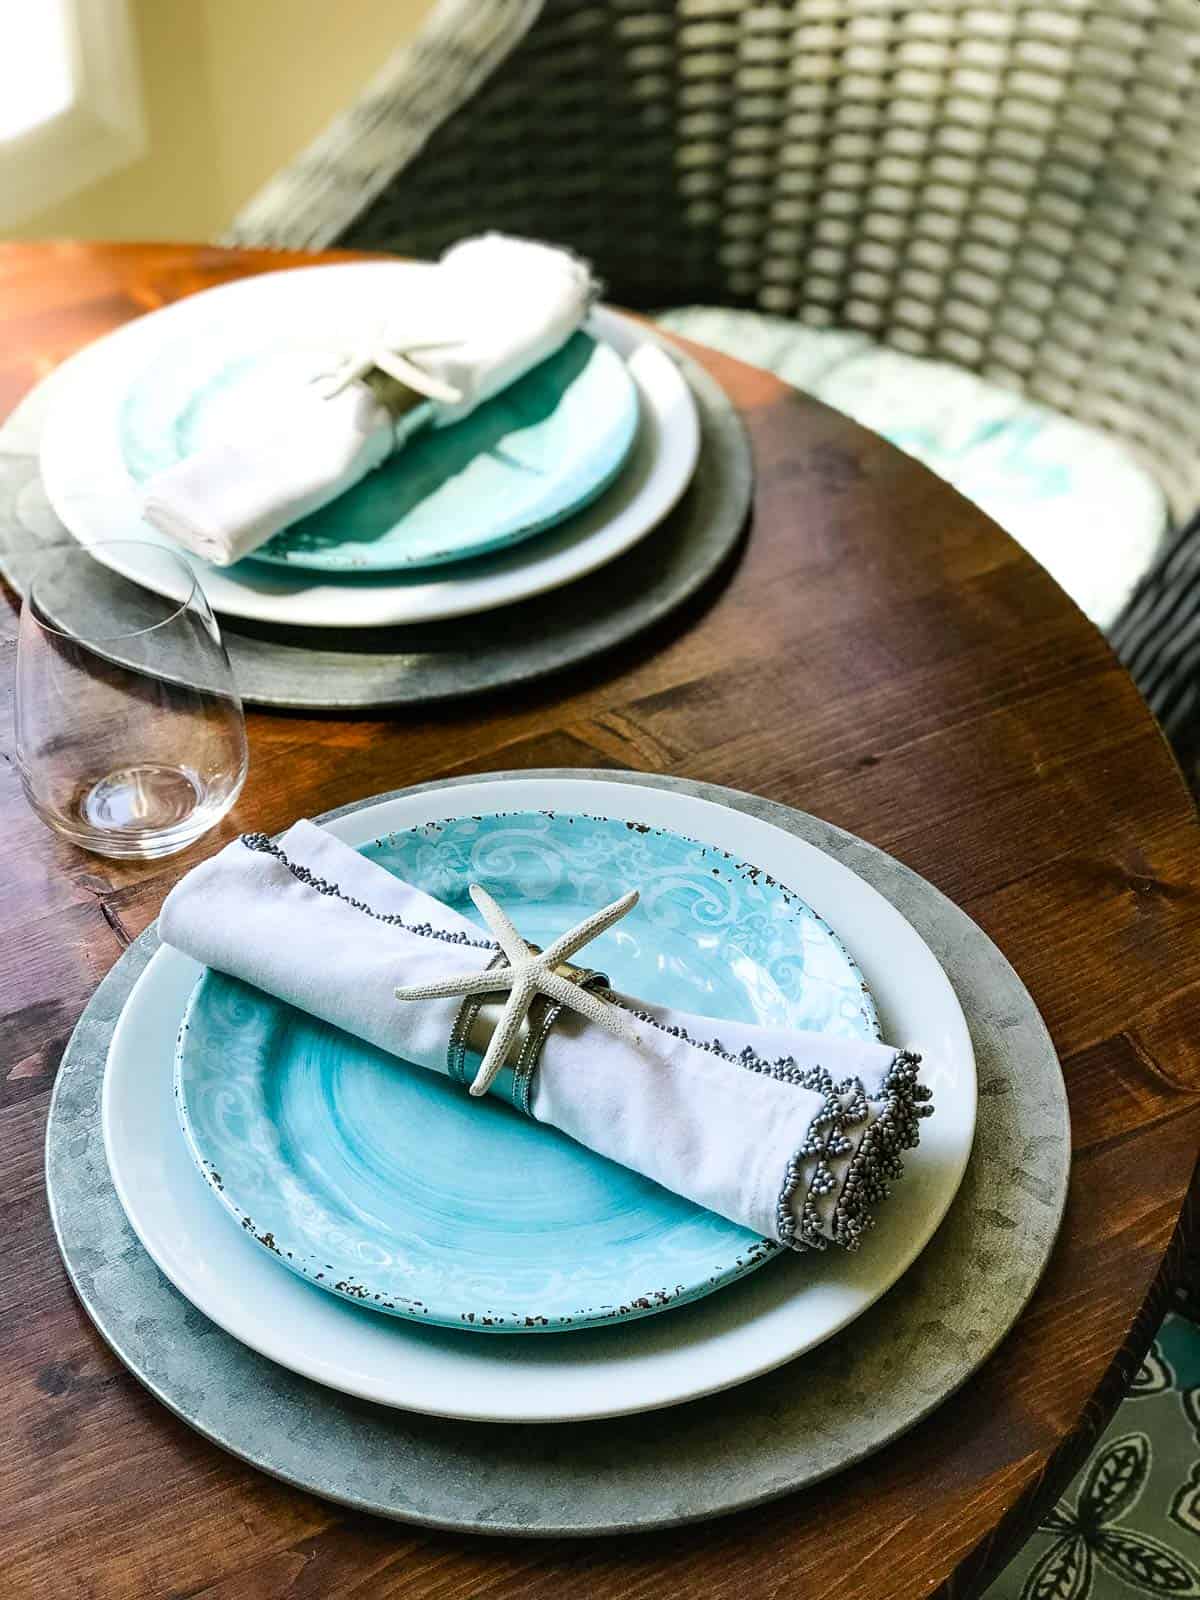 Coastal place settings on wood table with wicker chair